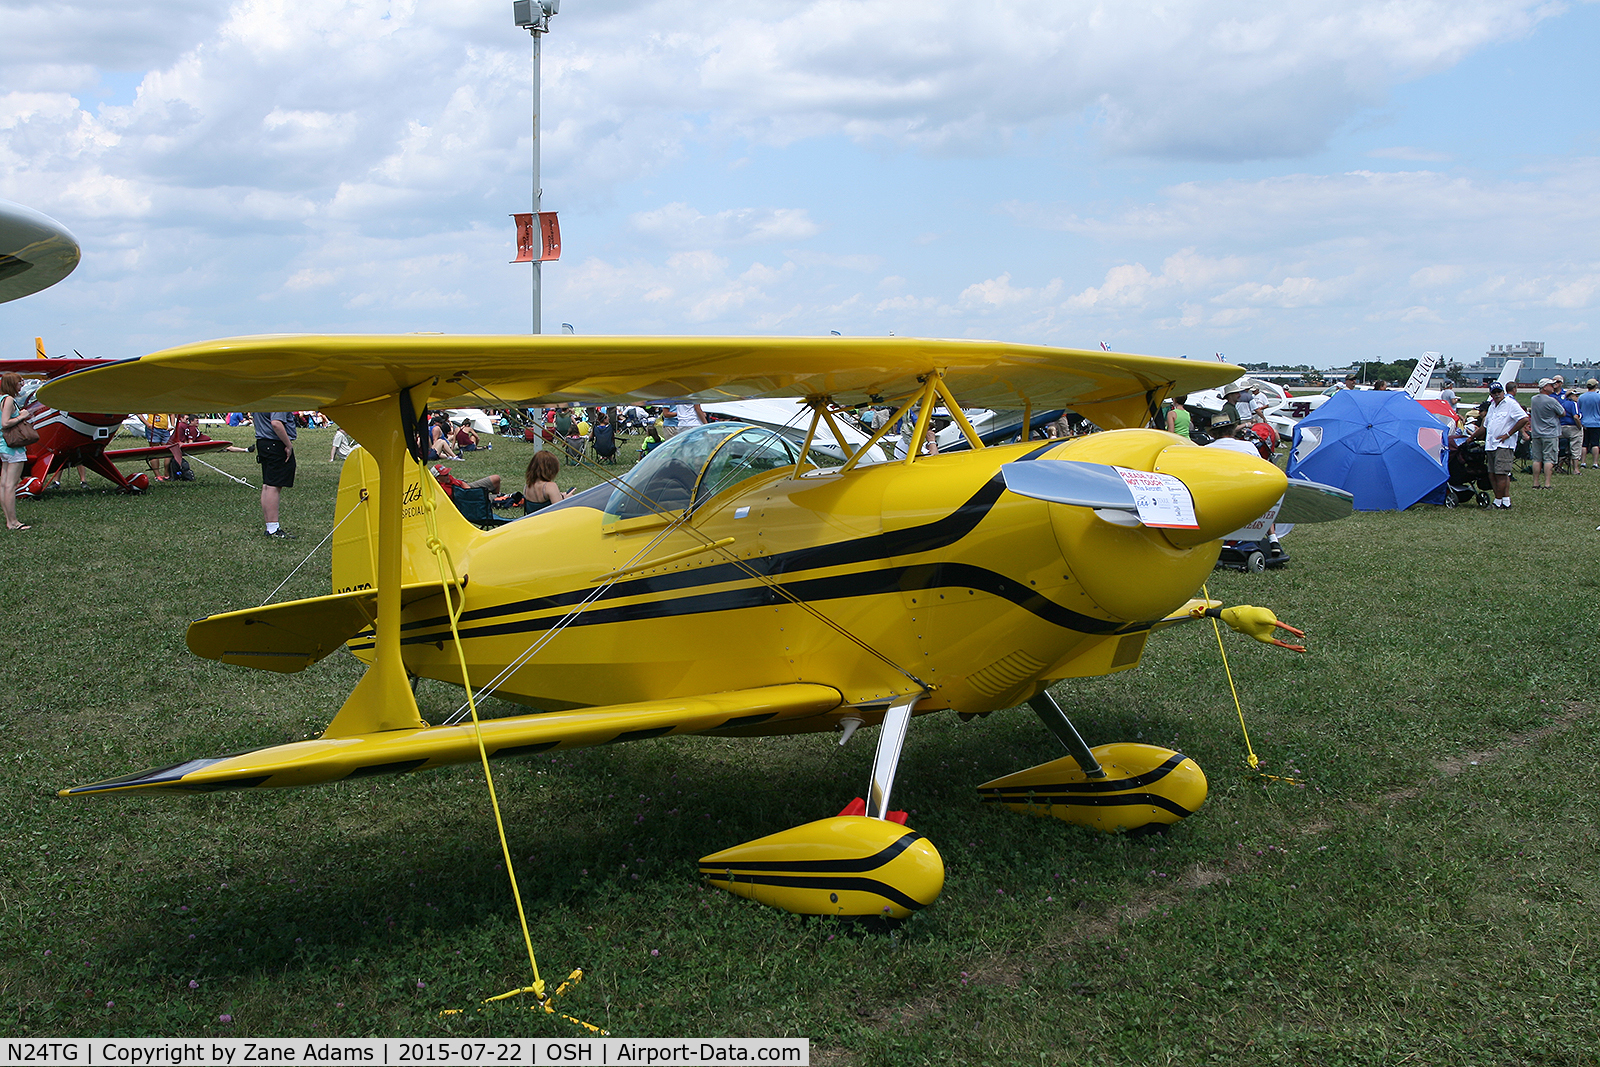 N24TG, 1975 Pitts S-1S Special C/N 1975, 2015 - EAA AirVenture - Oshkosh Wisconsin